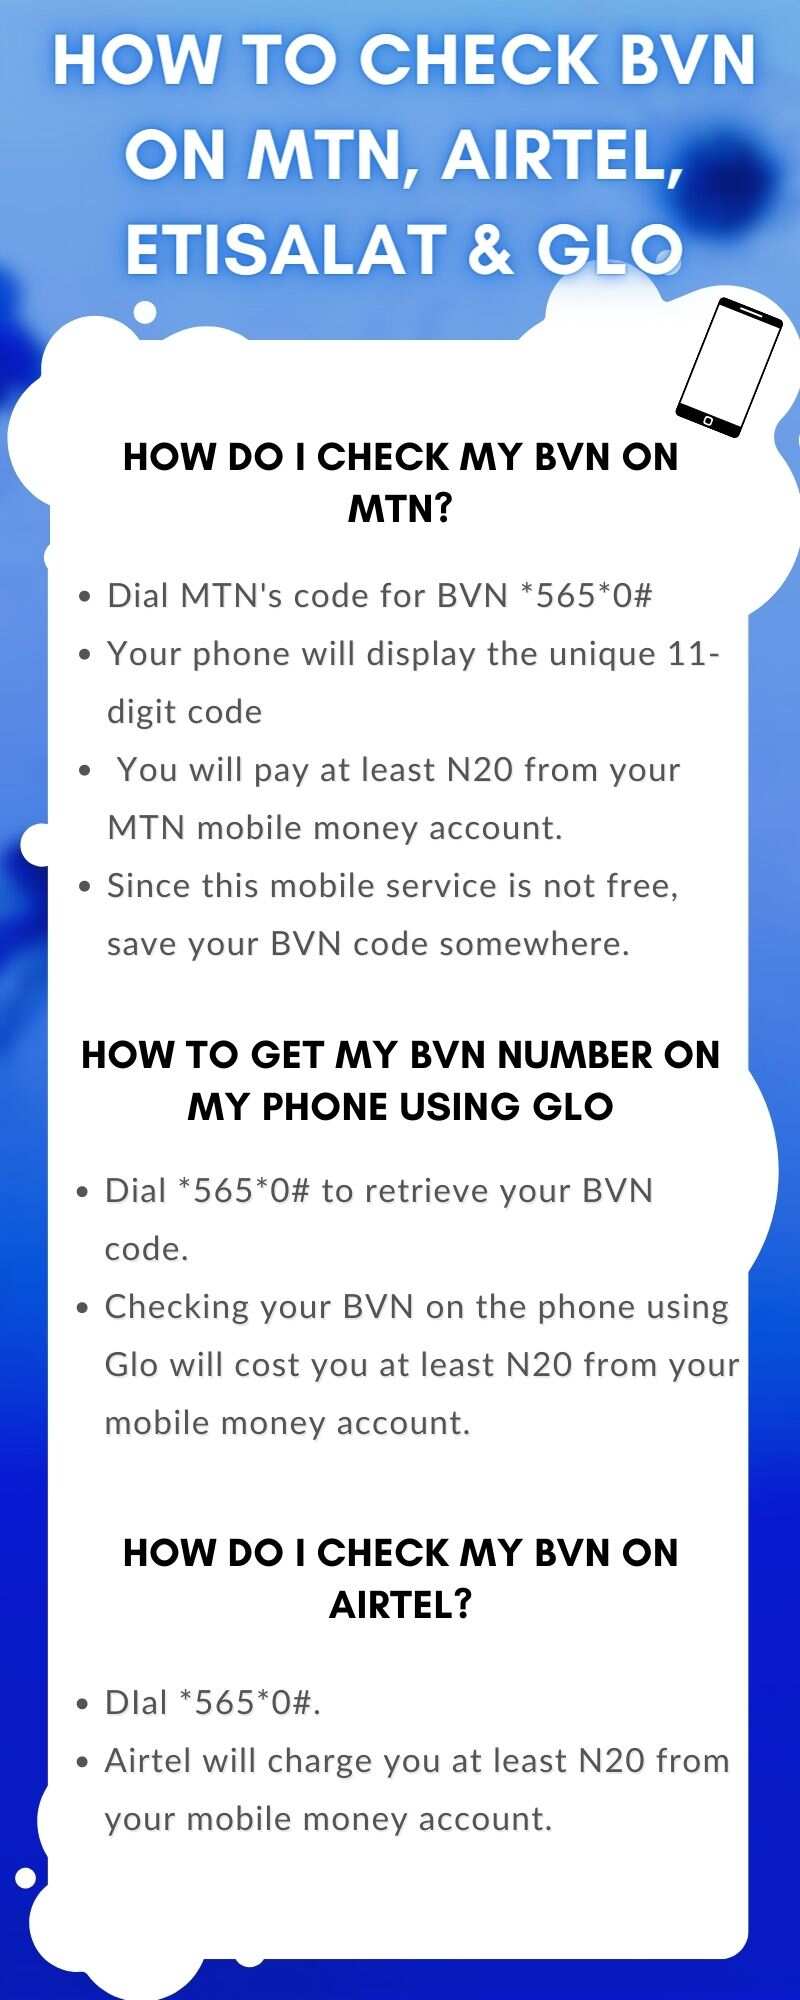 How to check BVN on MTN, Airtel, Etisalat & Glo